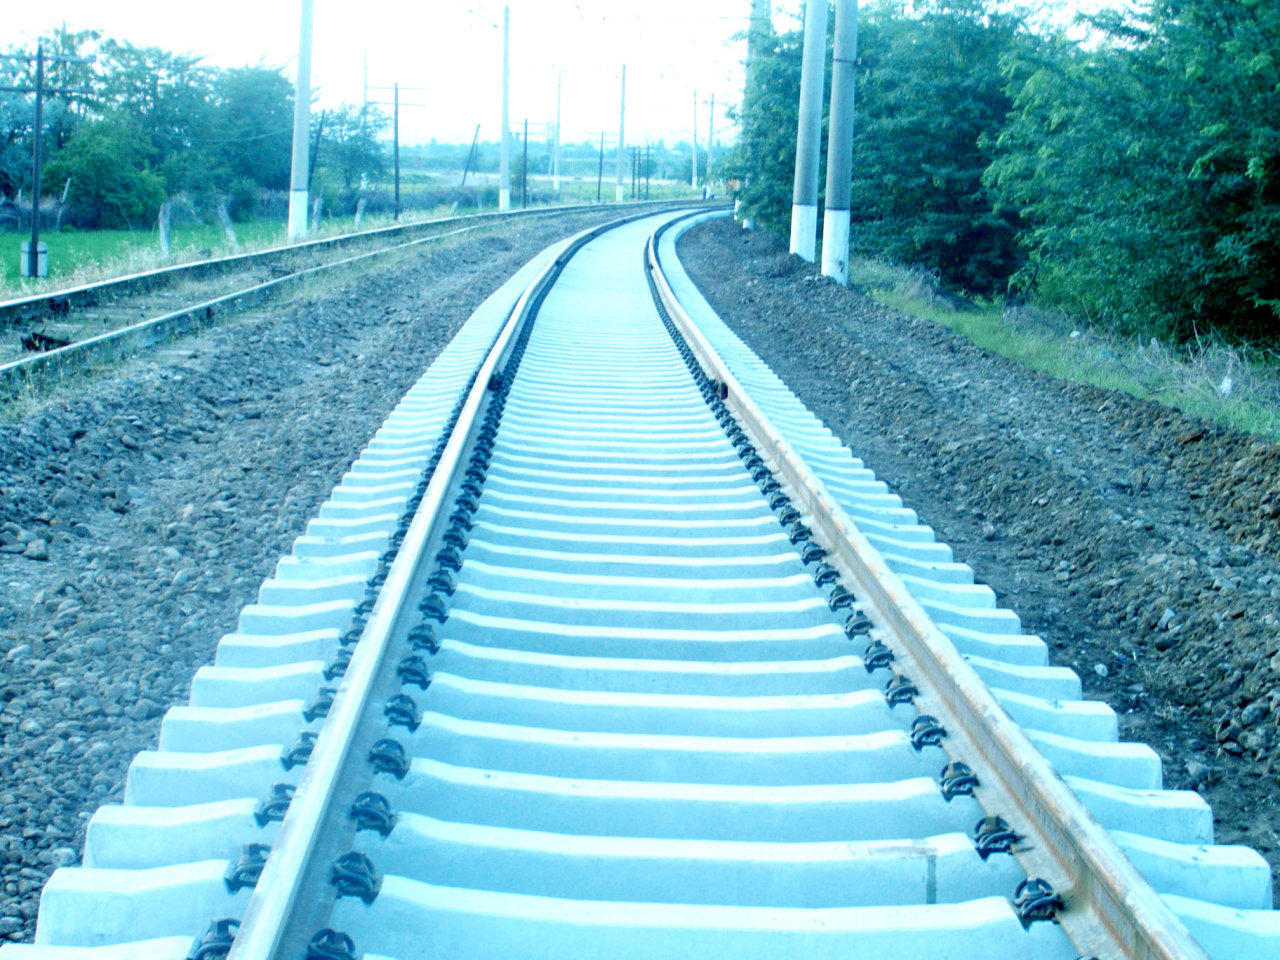 Kazakh plant will supply 7,500 tons of rails to Russia